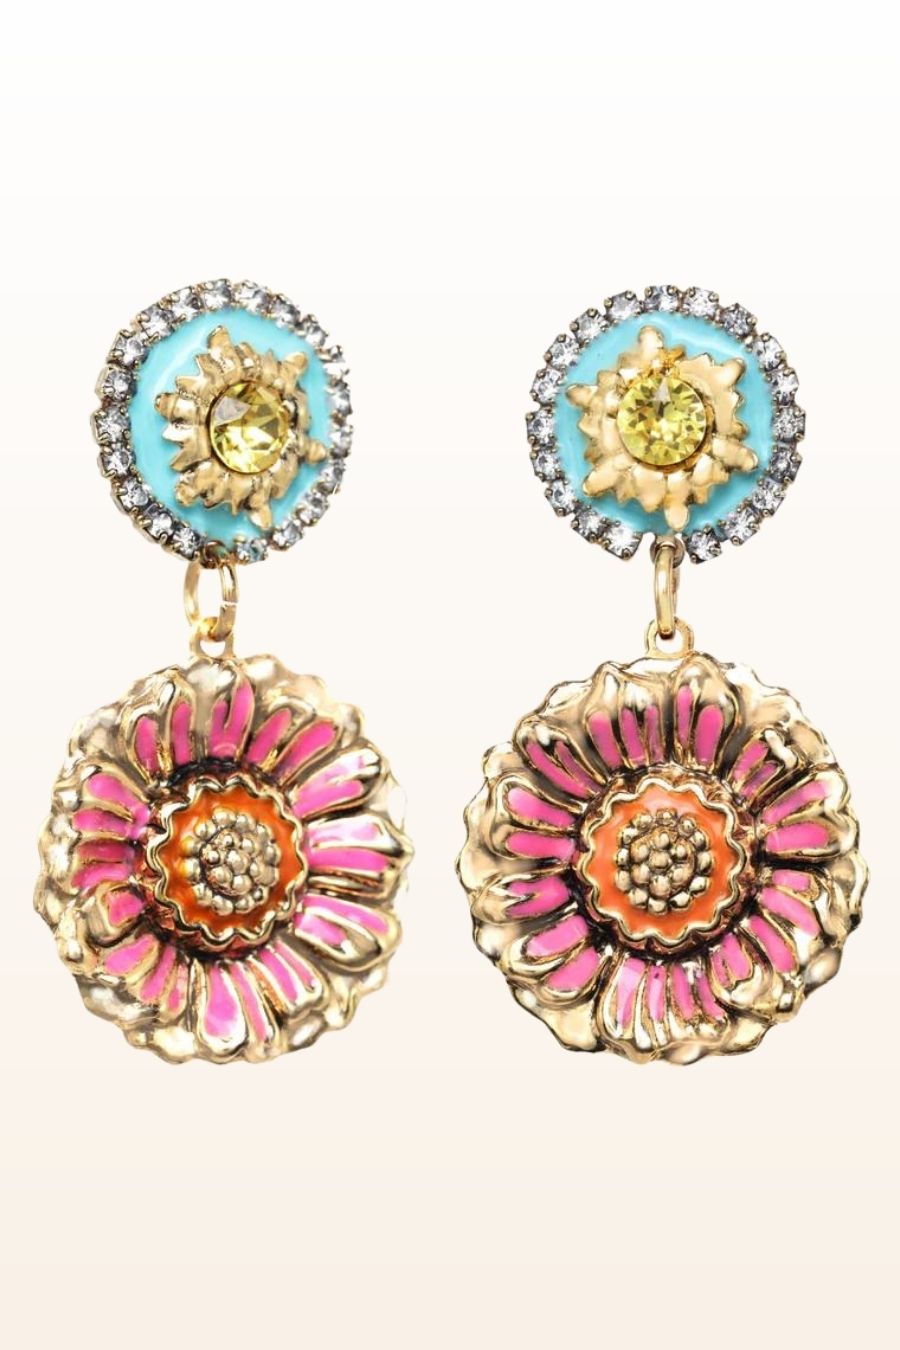 Marni Earrings in Pink and Turquoise